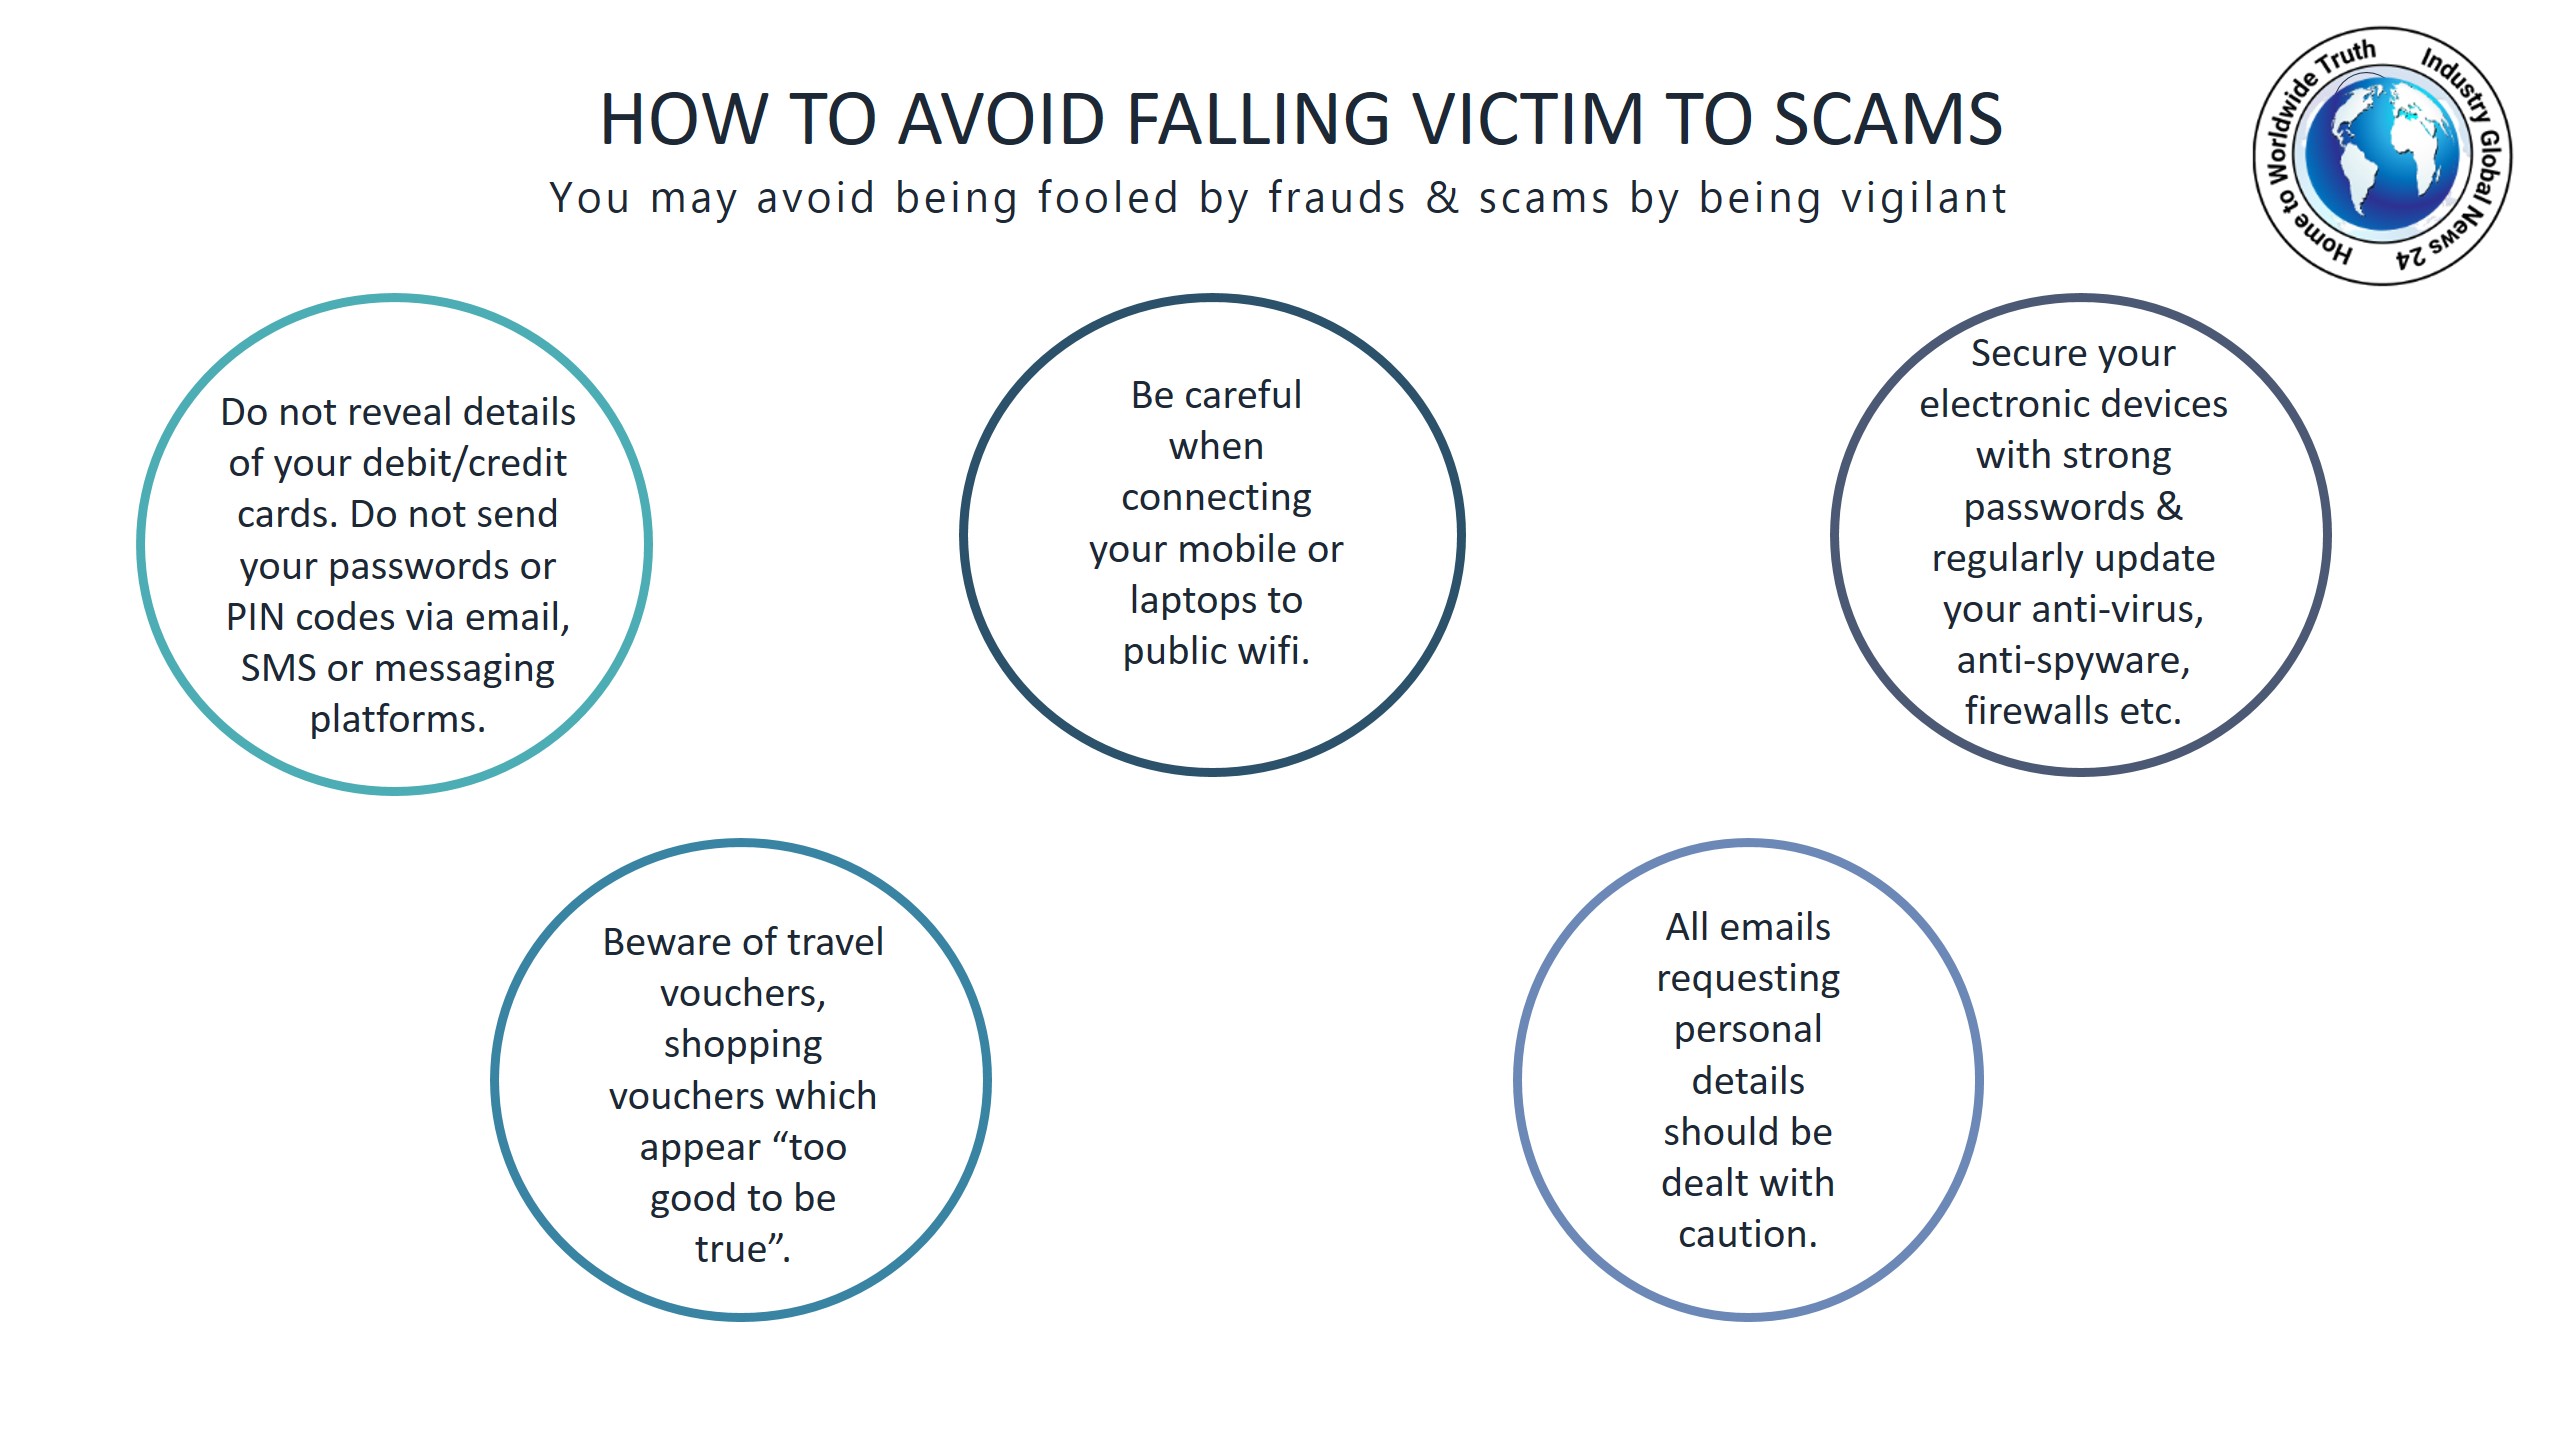 How to avoid falling victim to scams